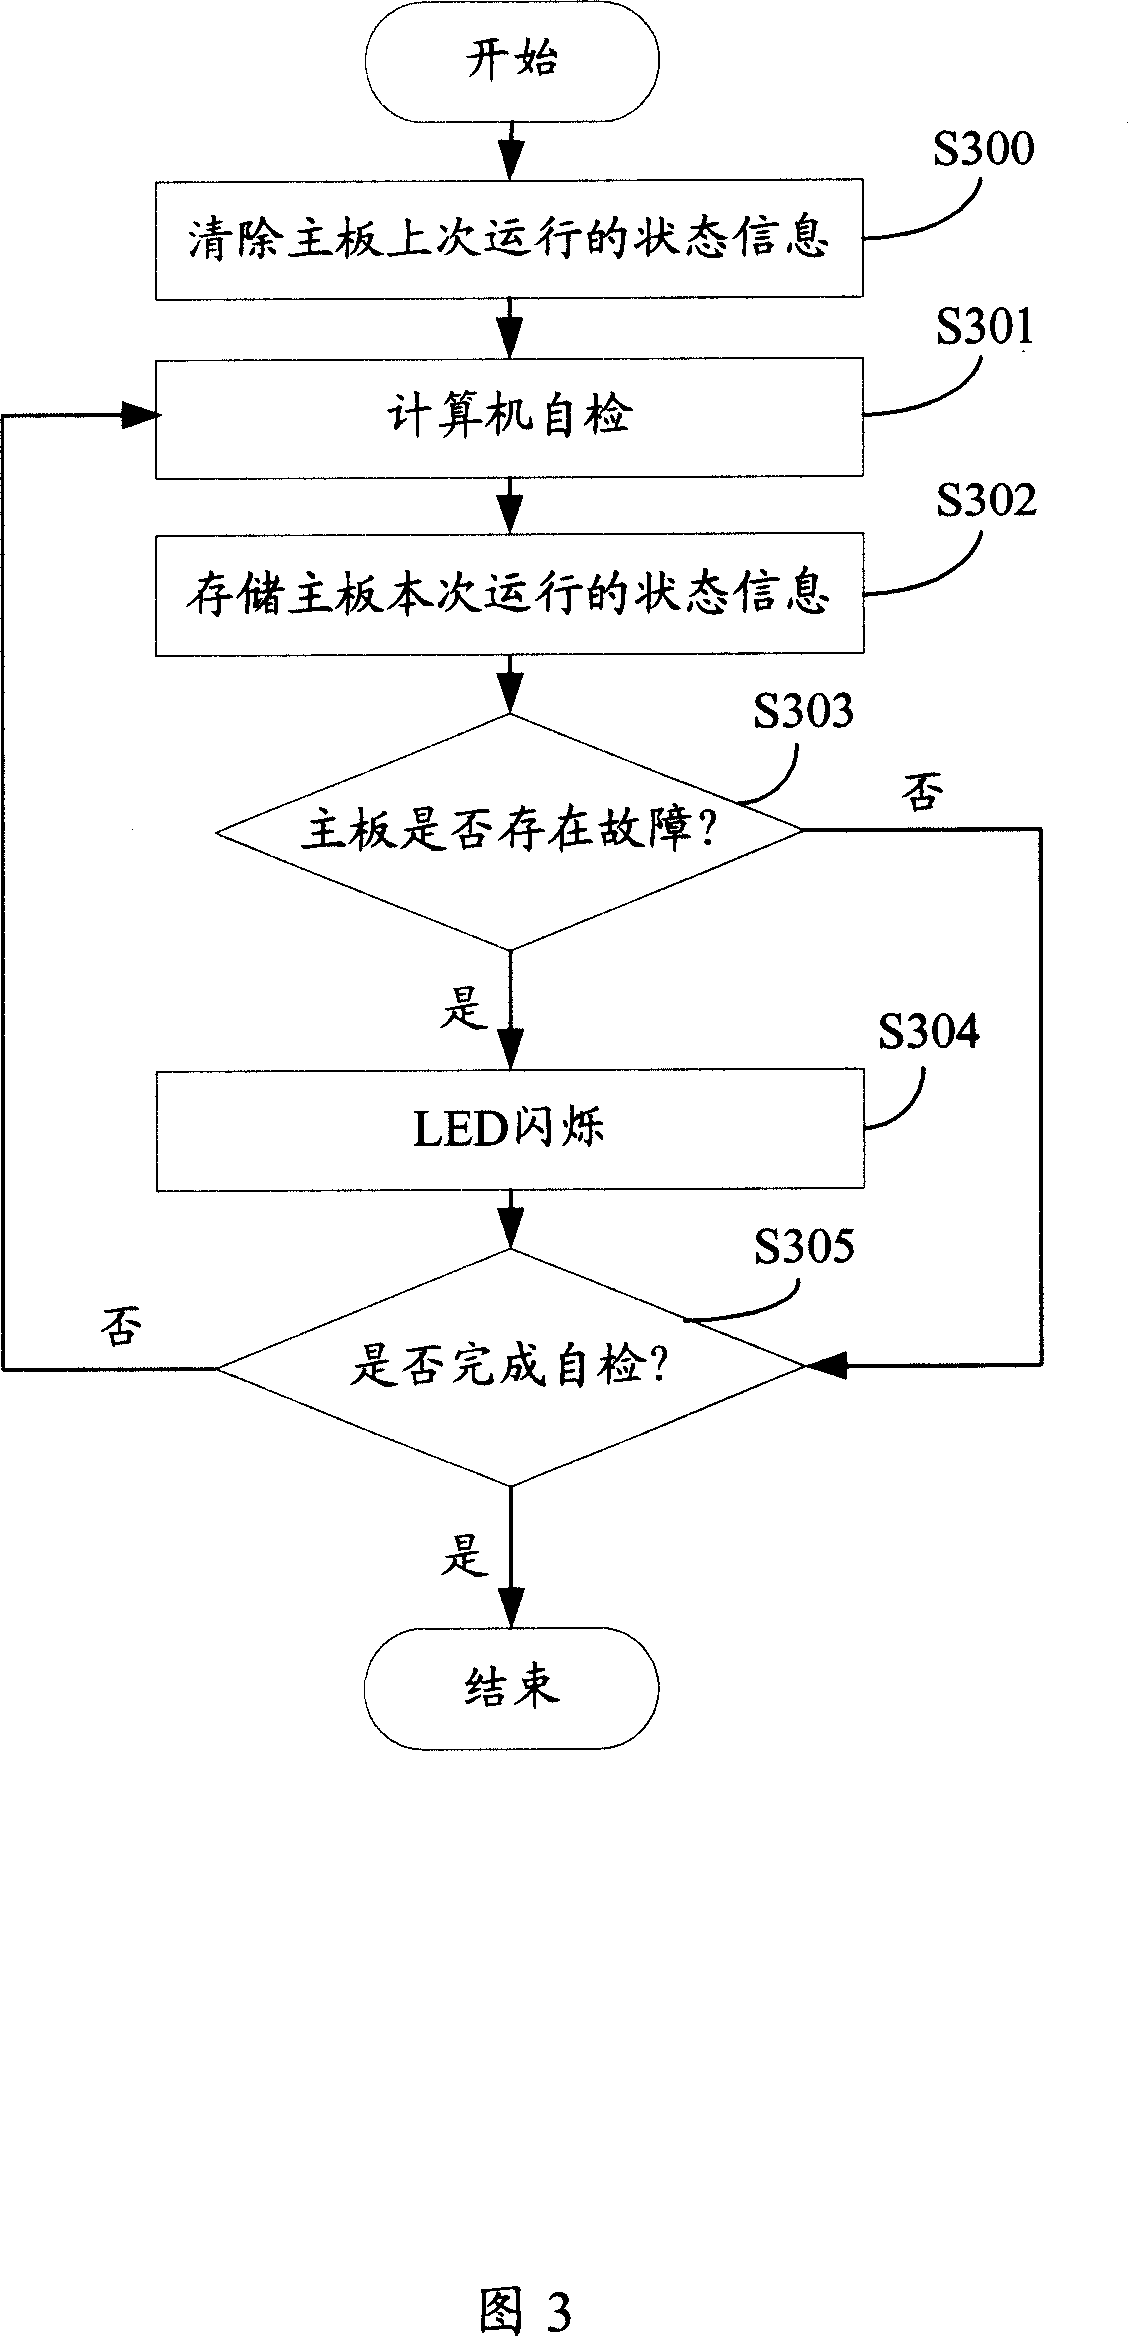 Master plate monitoring system and method